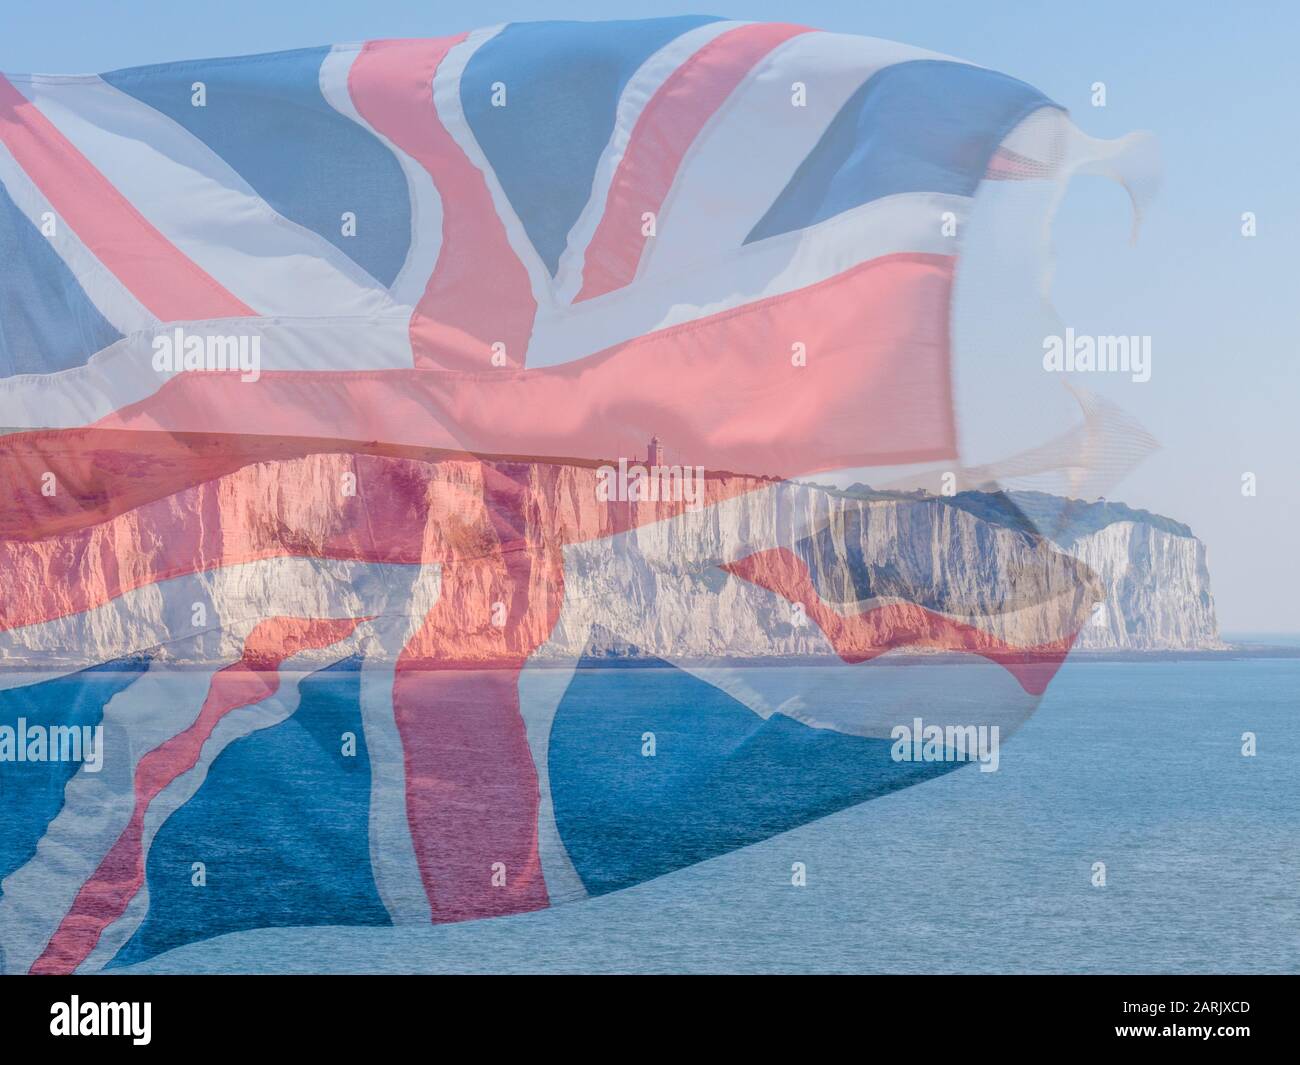 British Coastal Scene With White Cliffs of Dover Shot From the Sea. A Partially Opaque Union Jack Flag is Overlaid Stock Photo